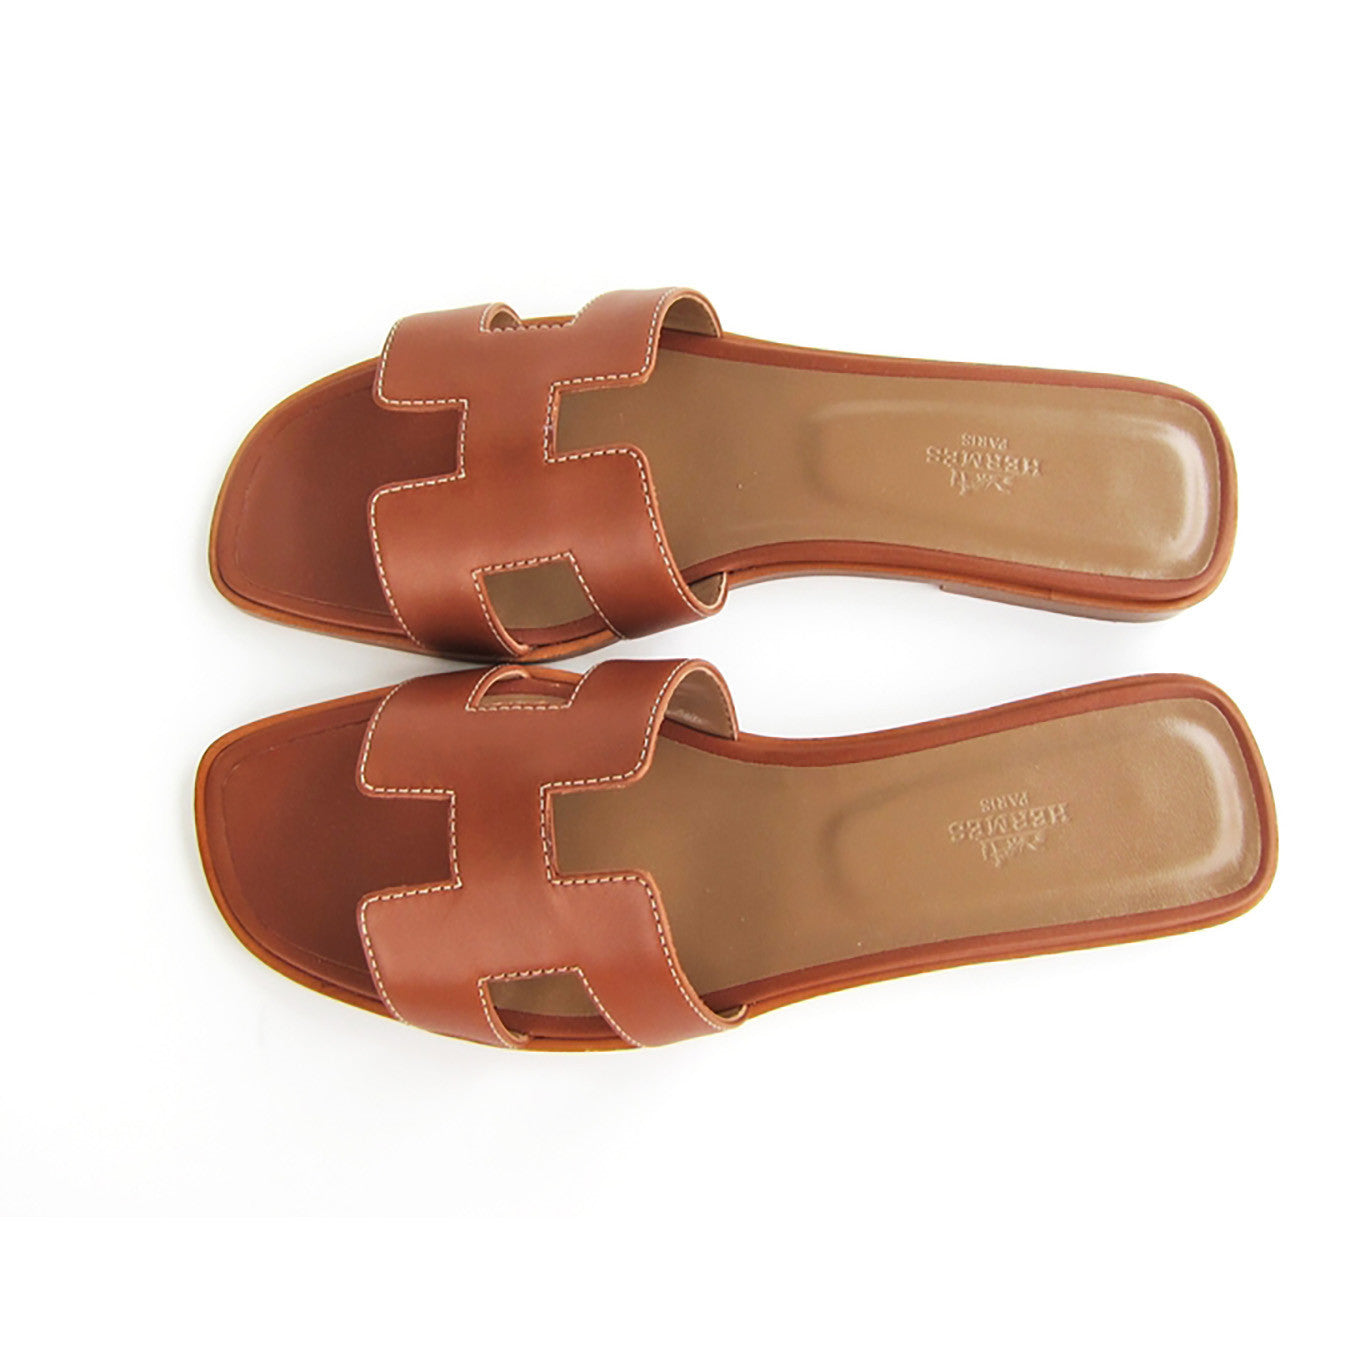 Hermes woman shoes classic leather slippers Epsom leather sandals